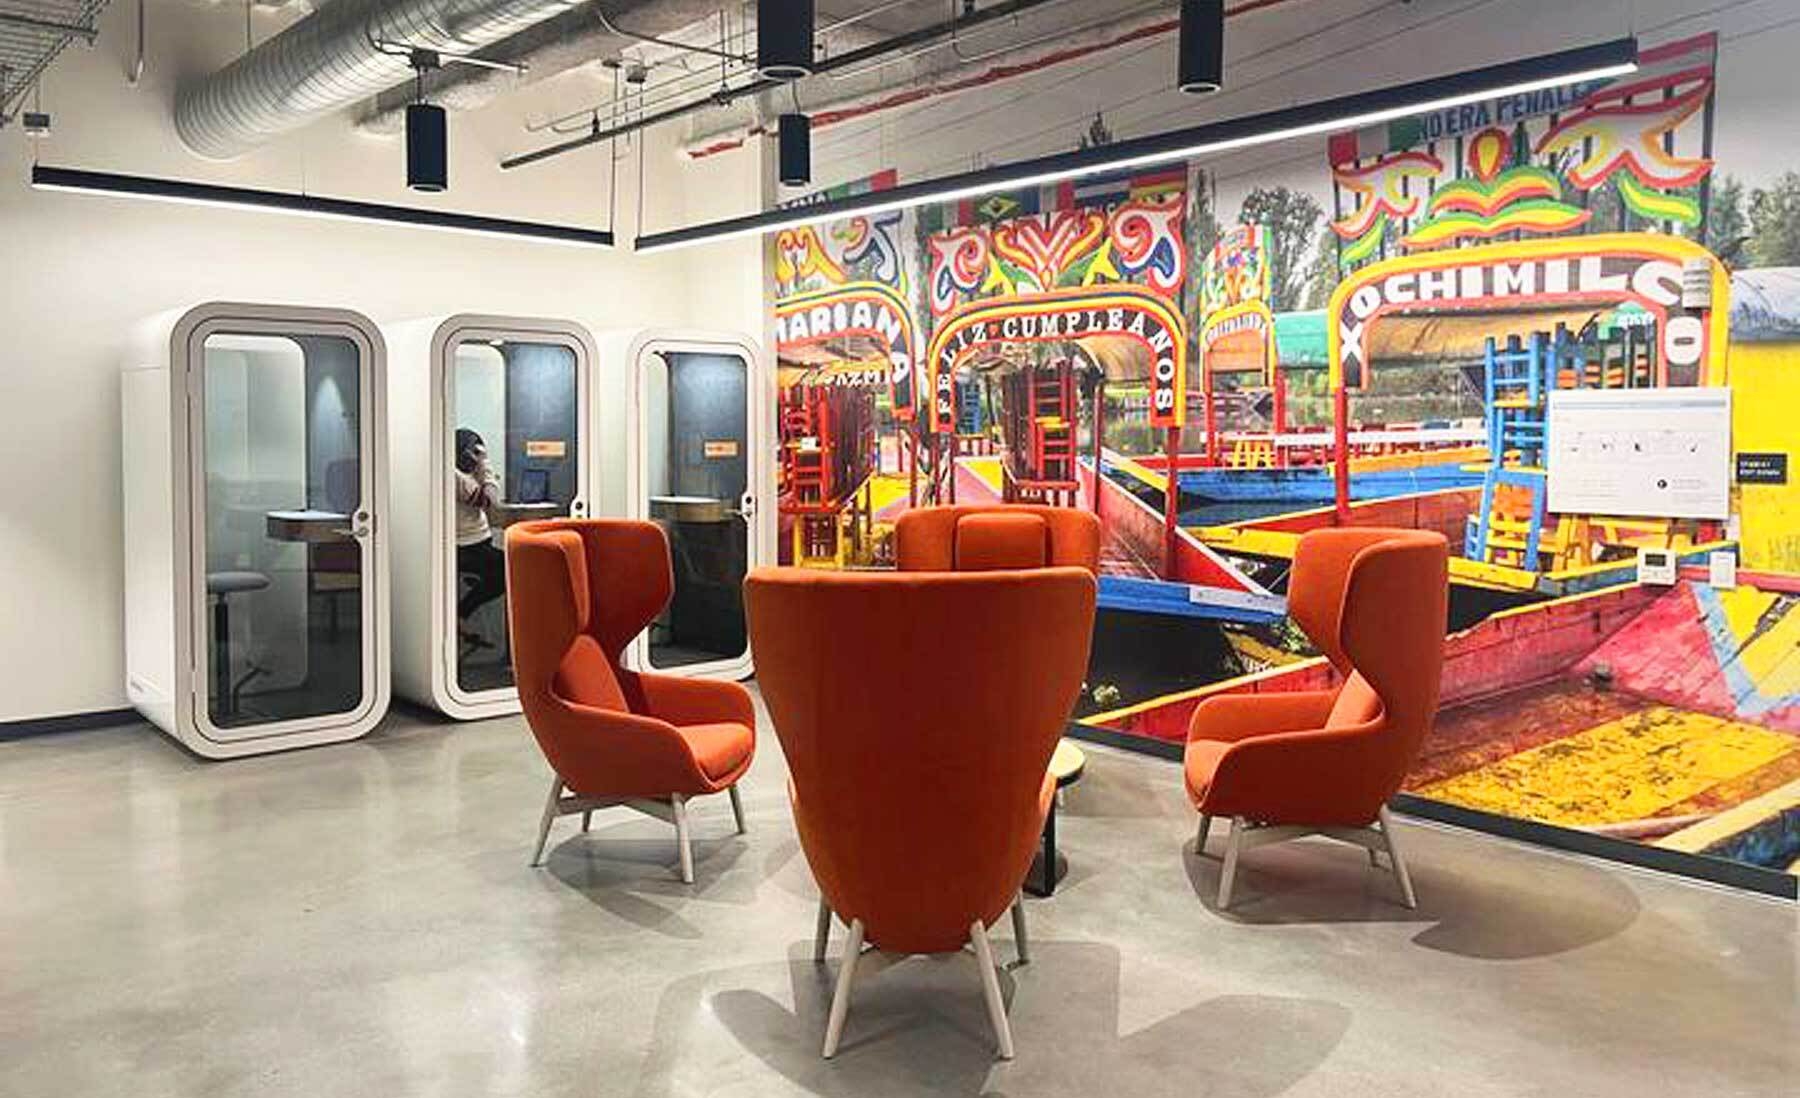 An image of a room with bright orange chairs in a circle. There is a colorful mural on the wall and phone call booths along another wall.